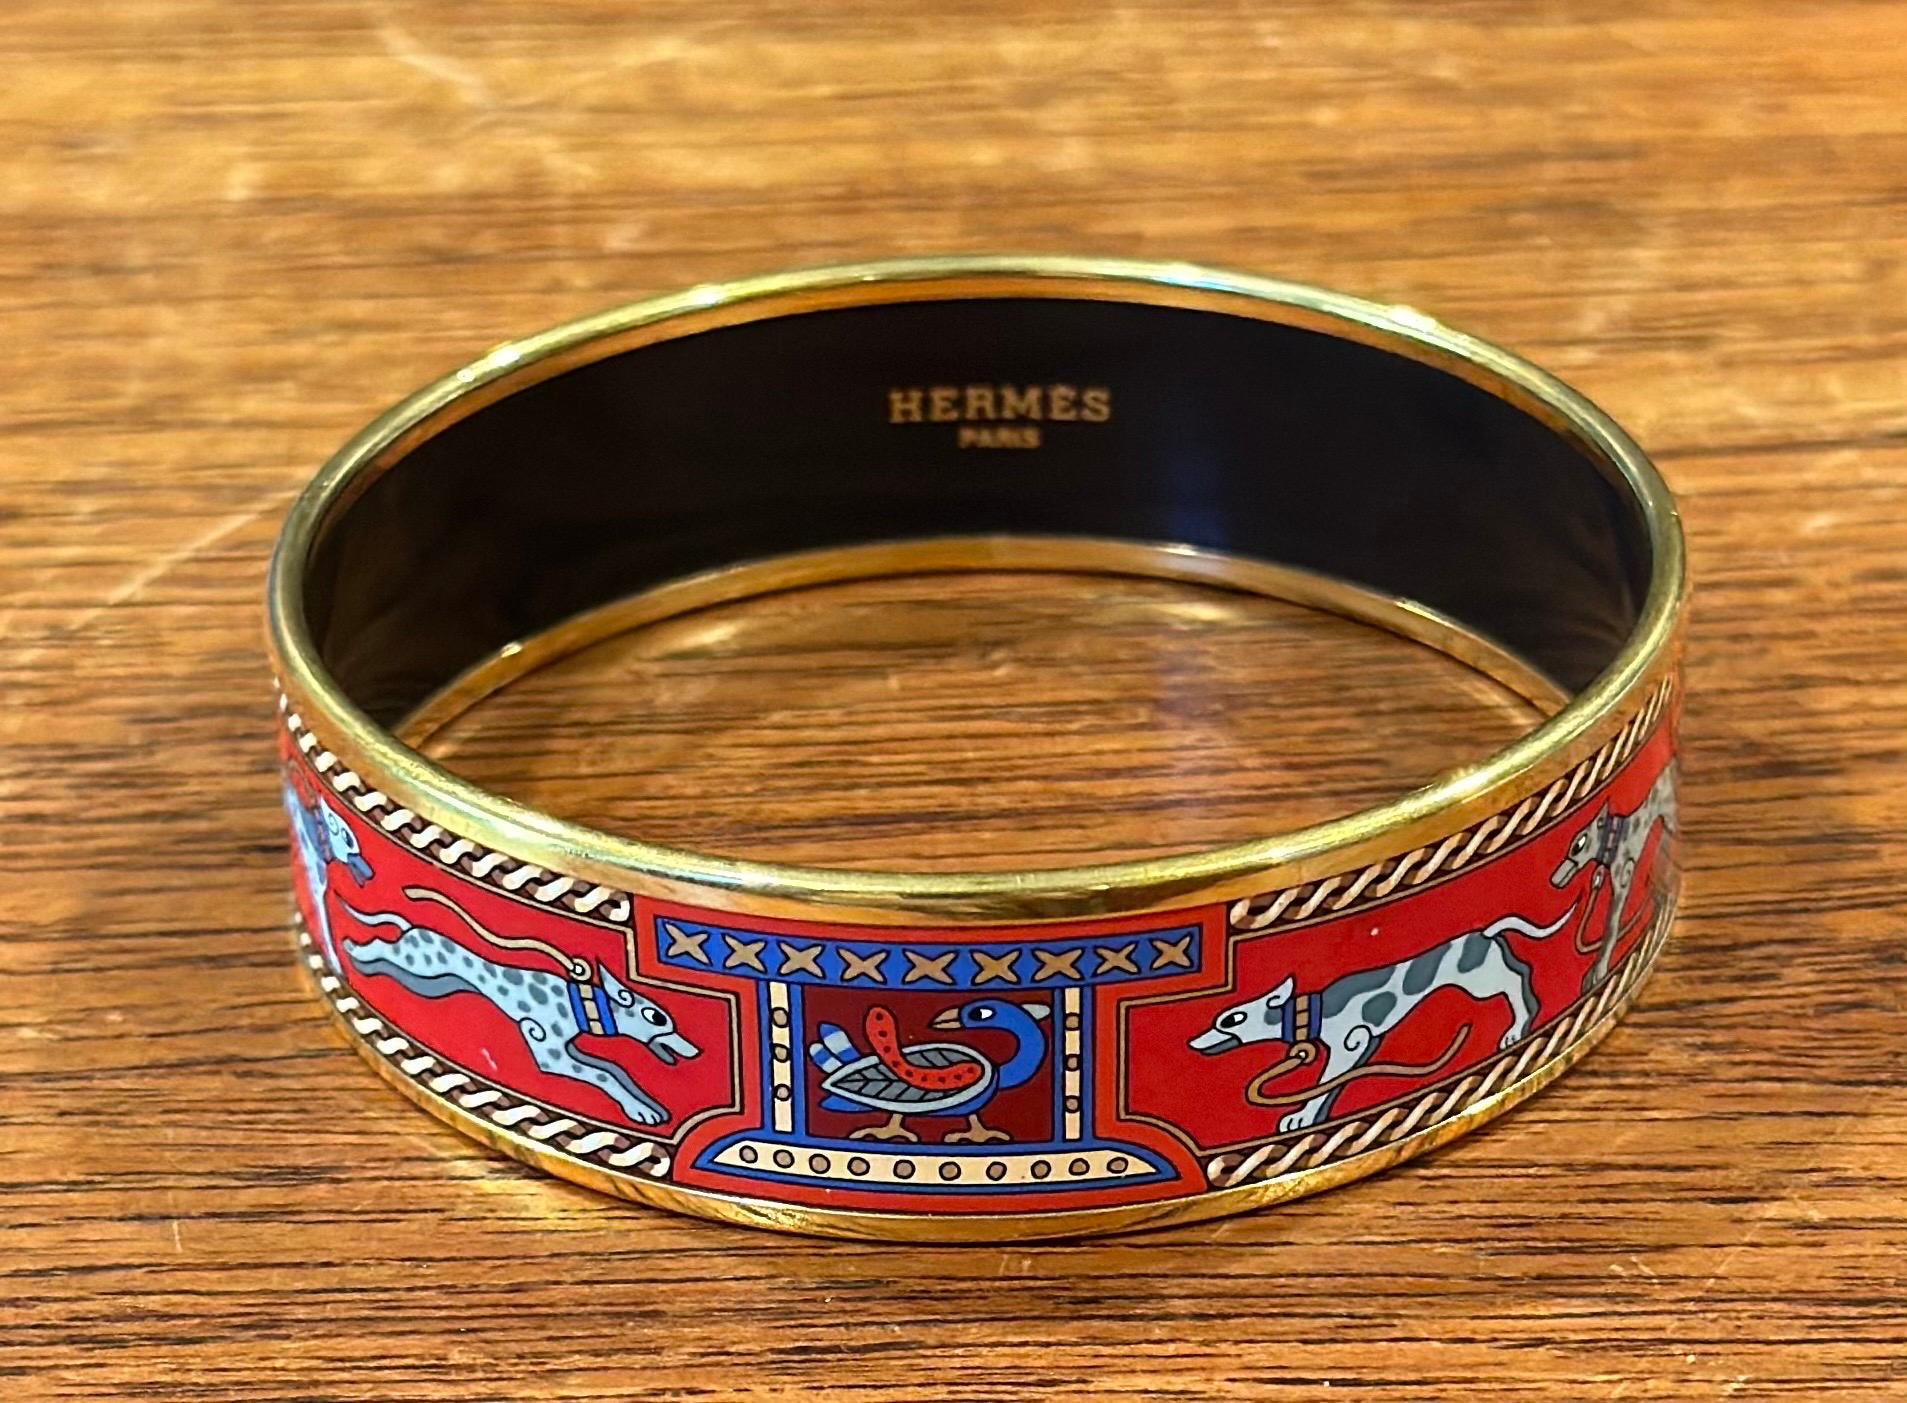 Vintage Enameled Greyhound Bangle Bracelet with Box by Hermès 70mm In Good Condition For Sale In San Diego, CA